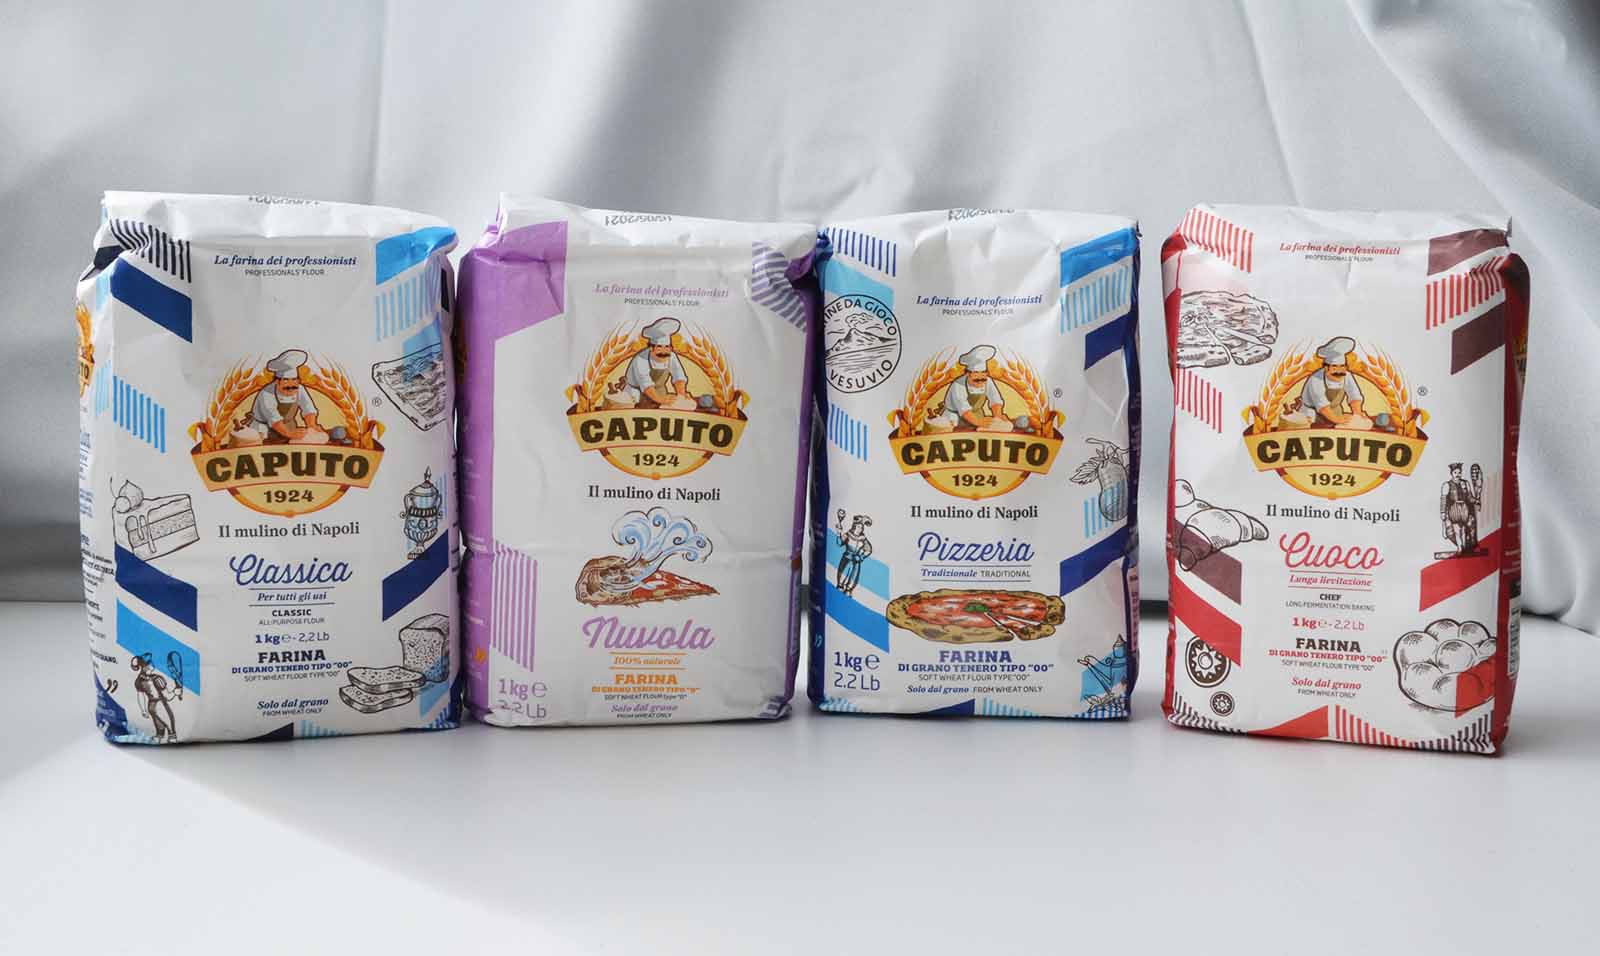 The best pizza flour for Neapolitan pizza. Showing a wide selection of Caputo pizza flours